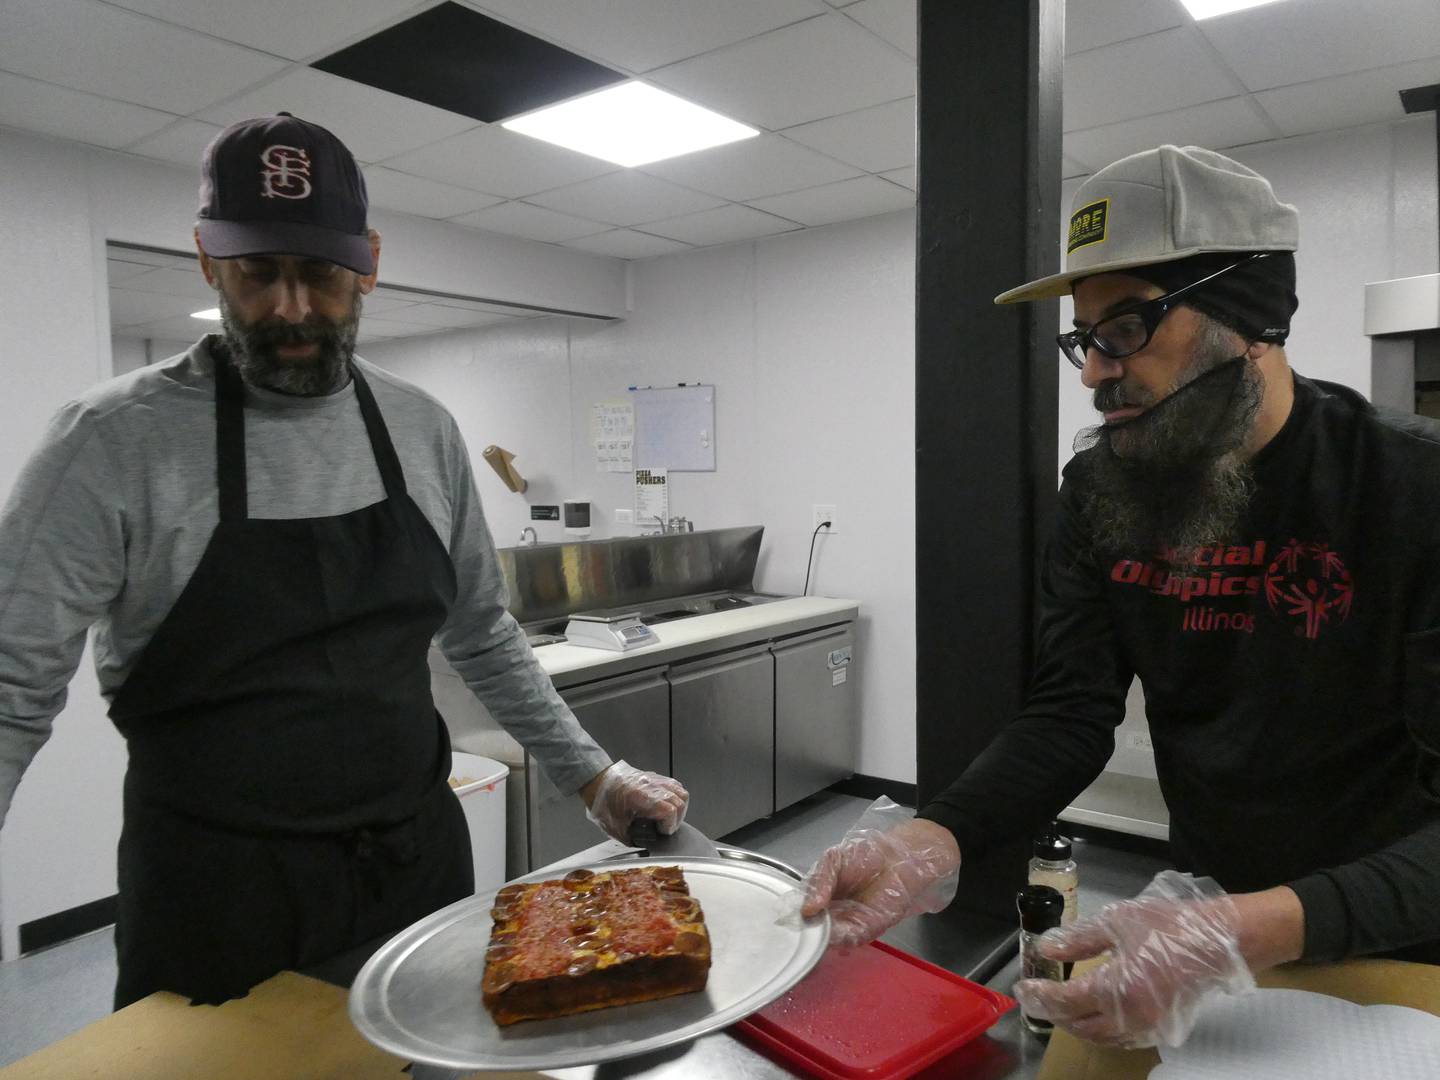 Co-owners Harry Canelos and Jamie Trakas present a Detroit-style pepperoni pizza inside the kitchen at Pizza Pushers, a new joint in Algonquin that specializes in Motor City offerings.